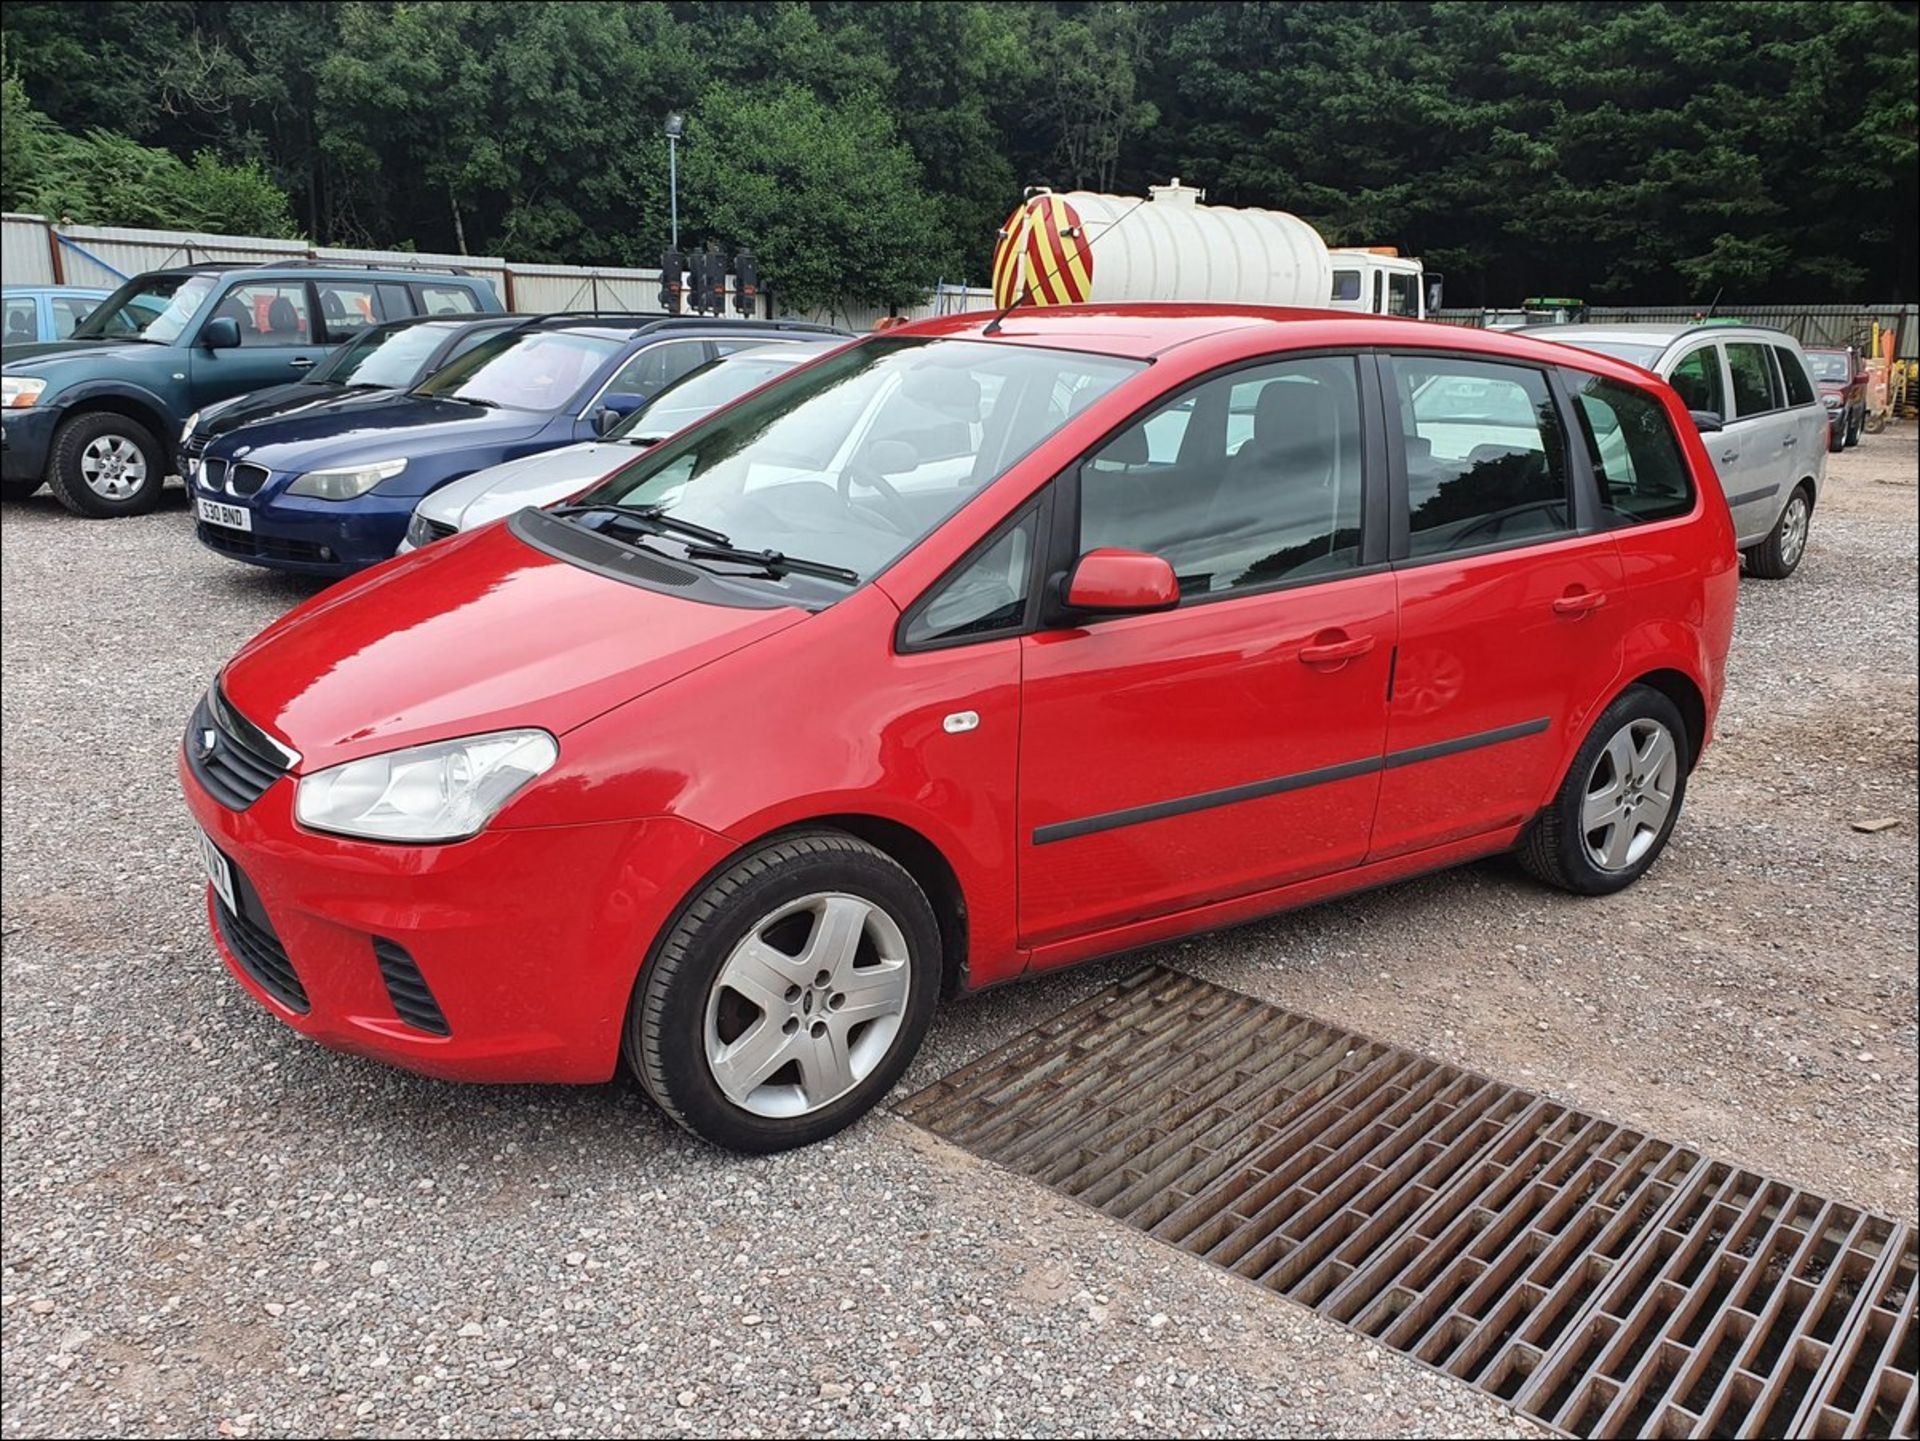 08/58 FORD C-MAX STYLE TD 90 - 1560cc 5dr MPV (Red, 153k) - Image 4 of 12